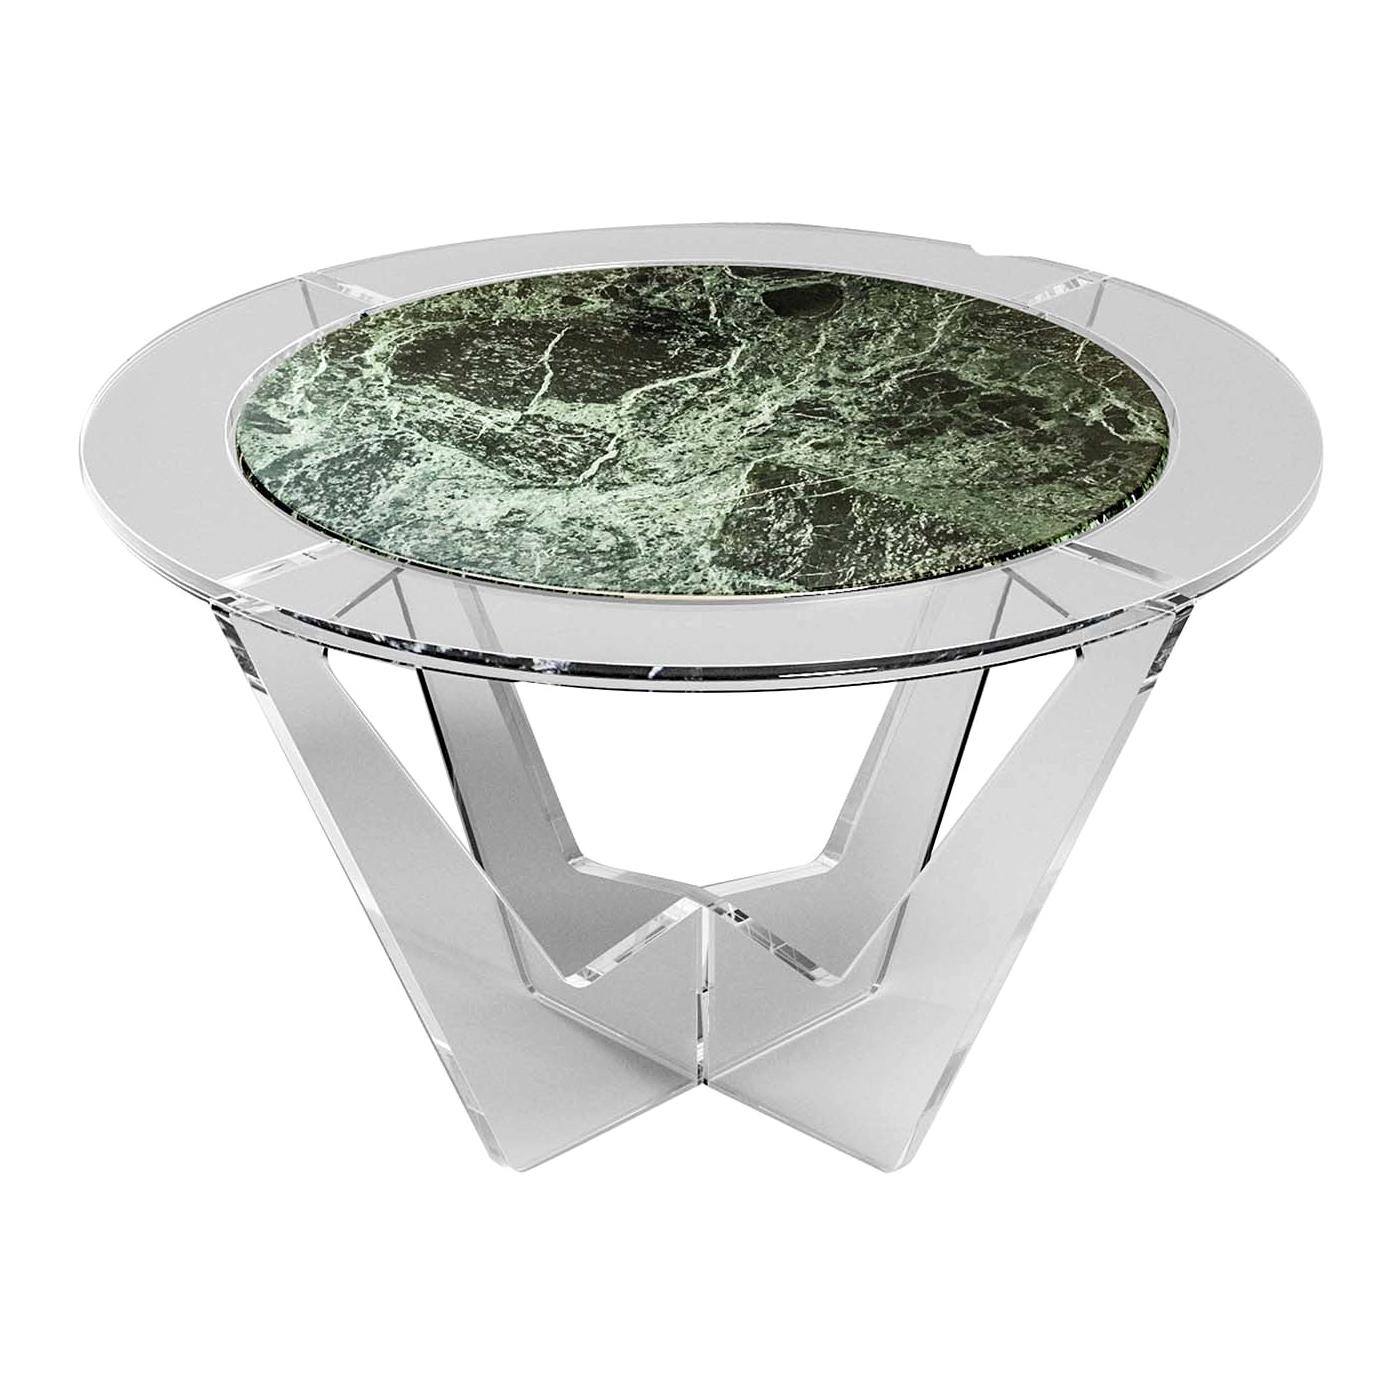 Hac Round Coffee Table with Green Alps Marble Top by Madea Milano